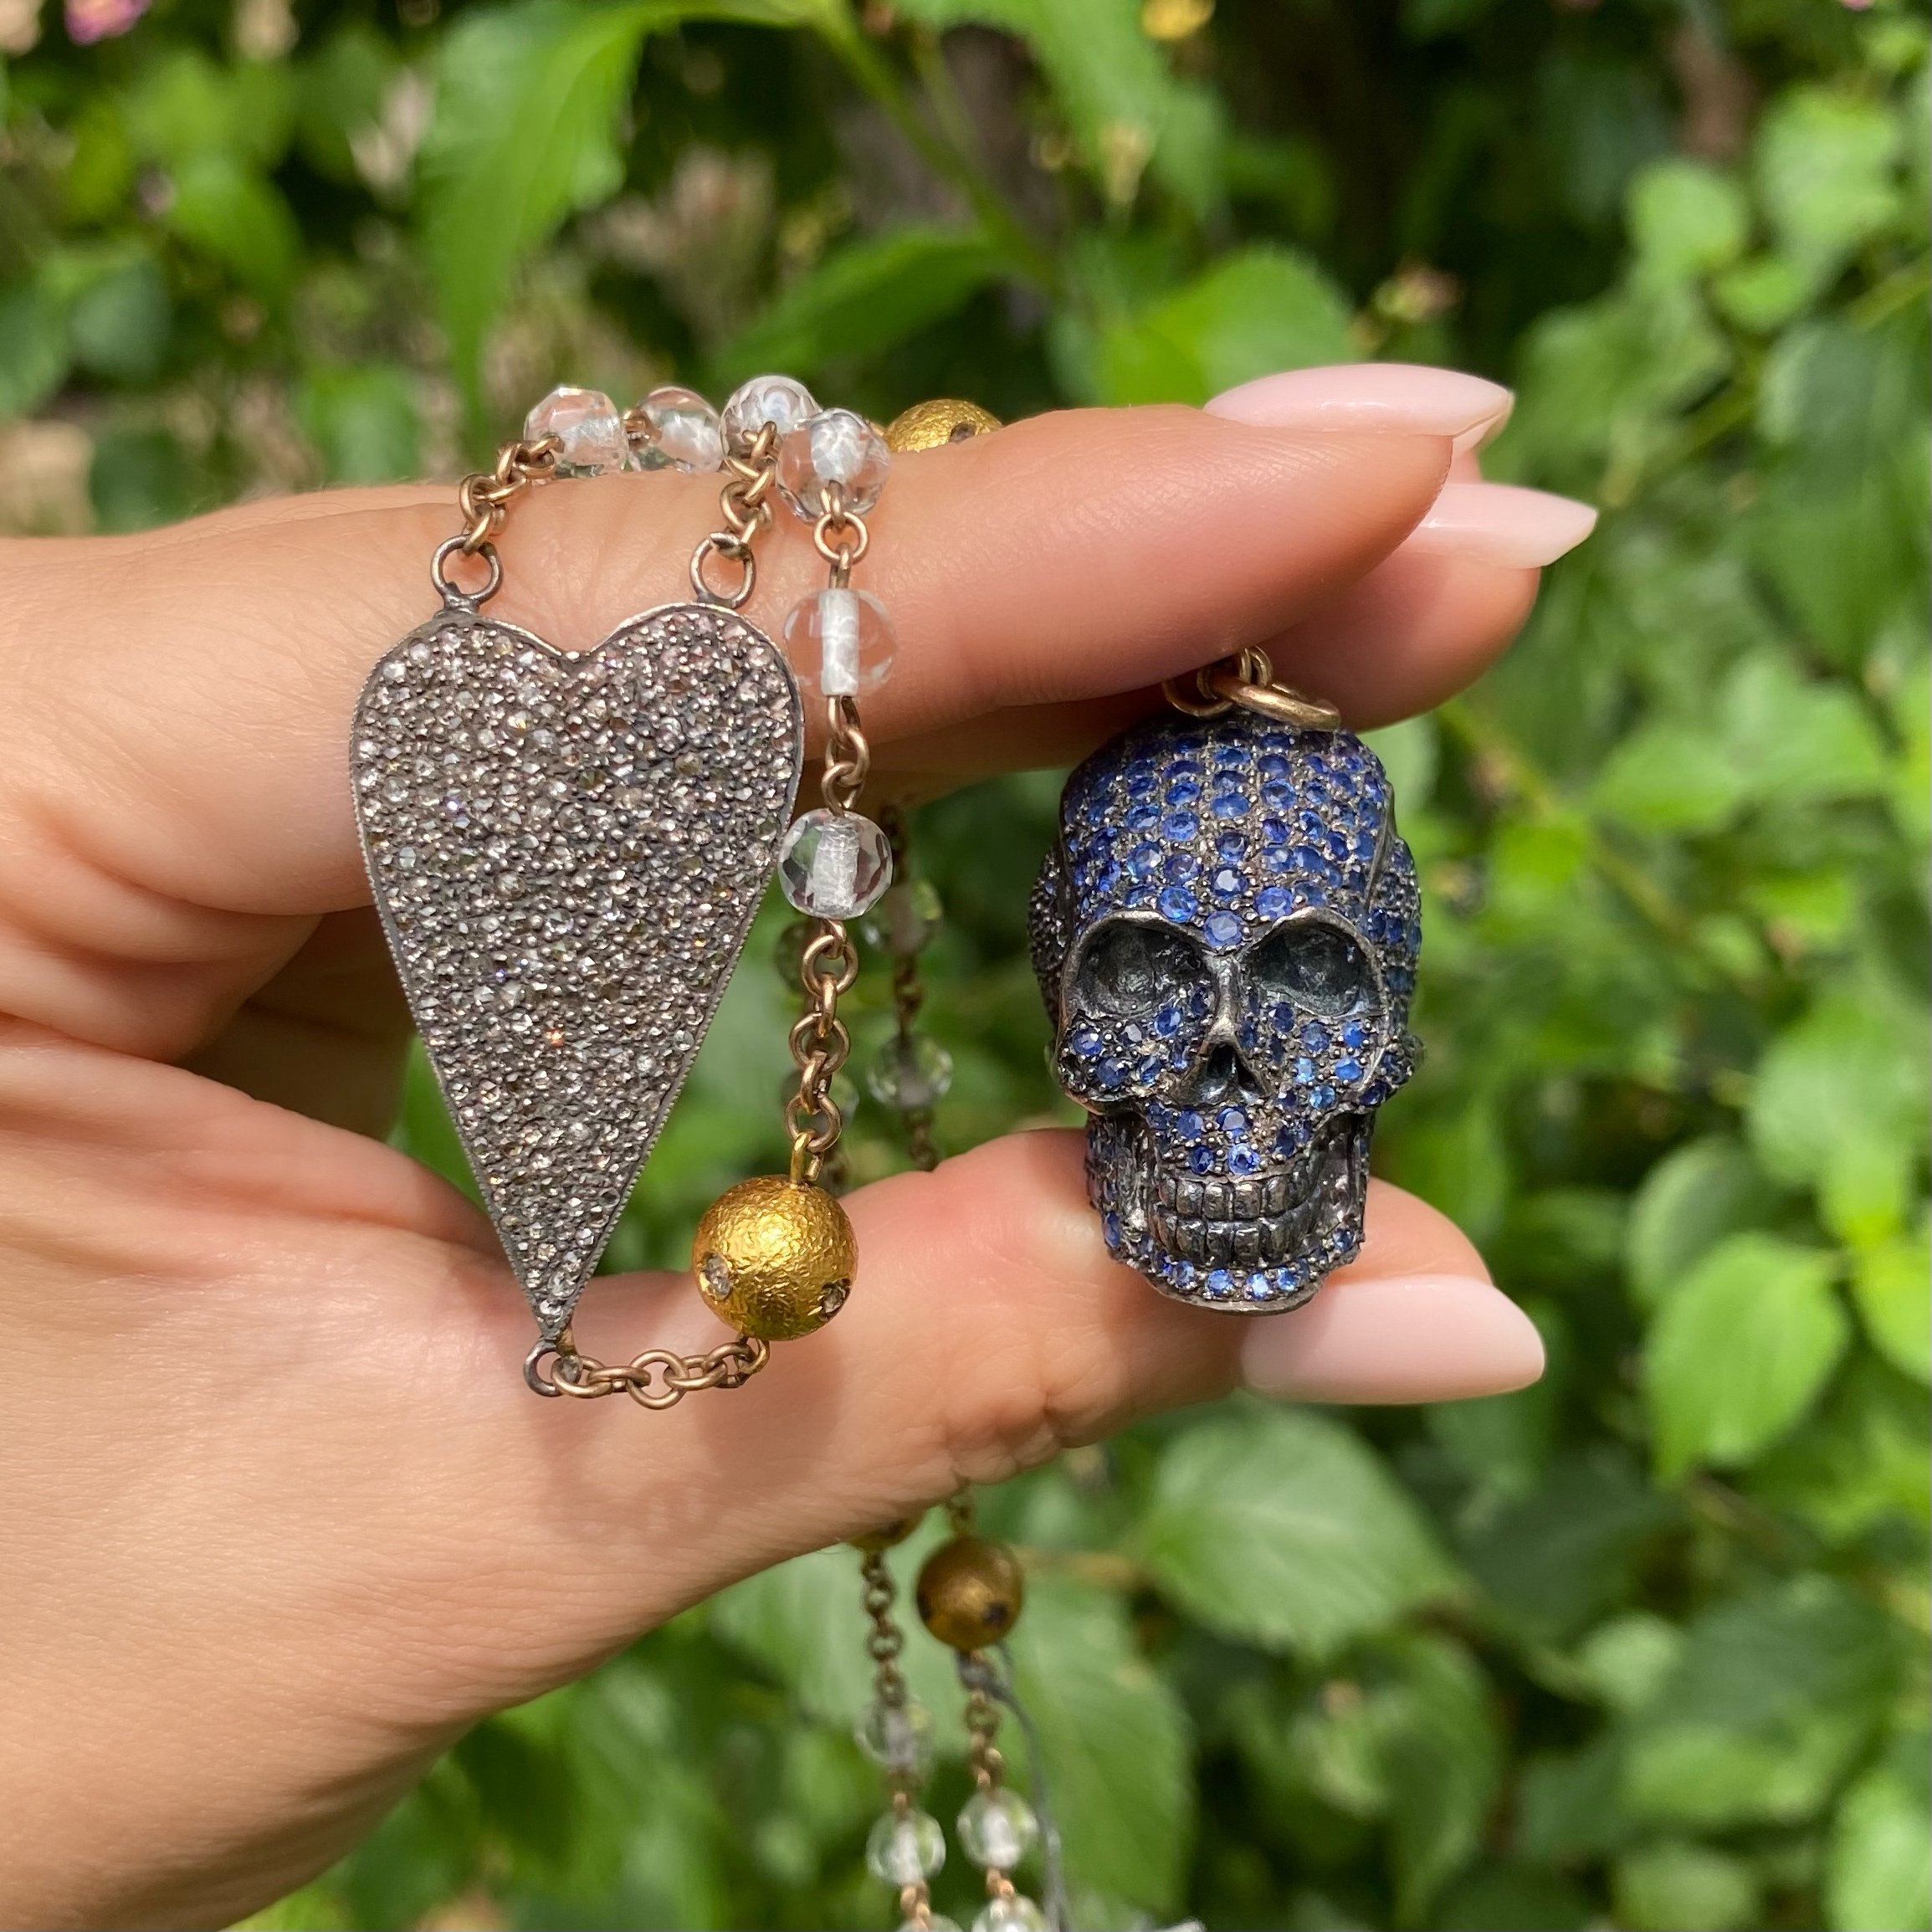 Dark Beaded Skull Beads Necklace With Pendant Trendy Punk Hip Hop Halloween  Jewelry Accessory From Naturalstore, $1.86 | DHgate.Com